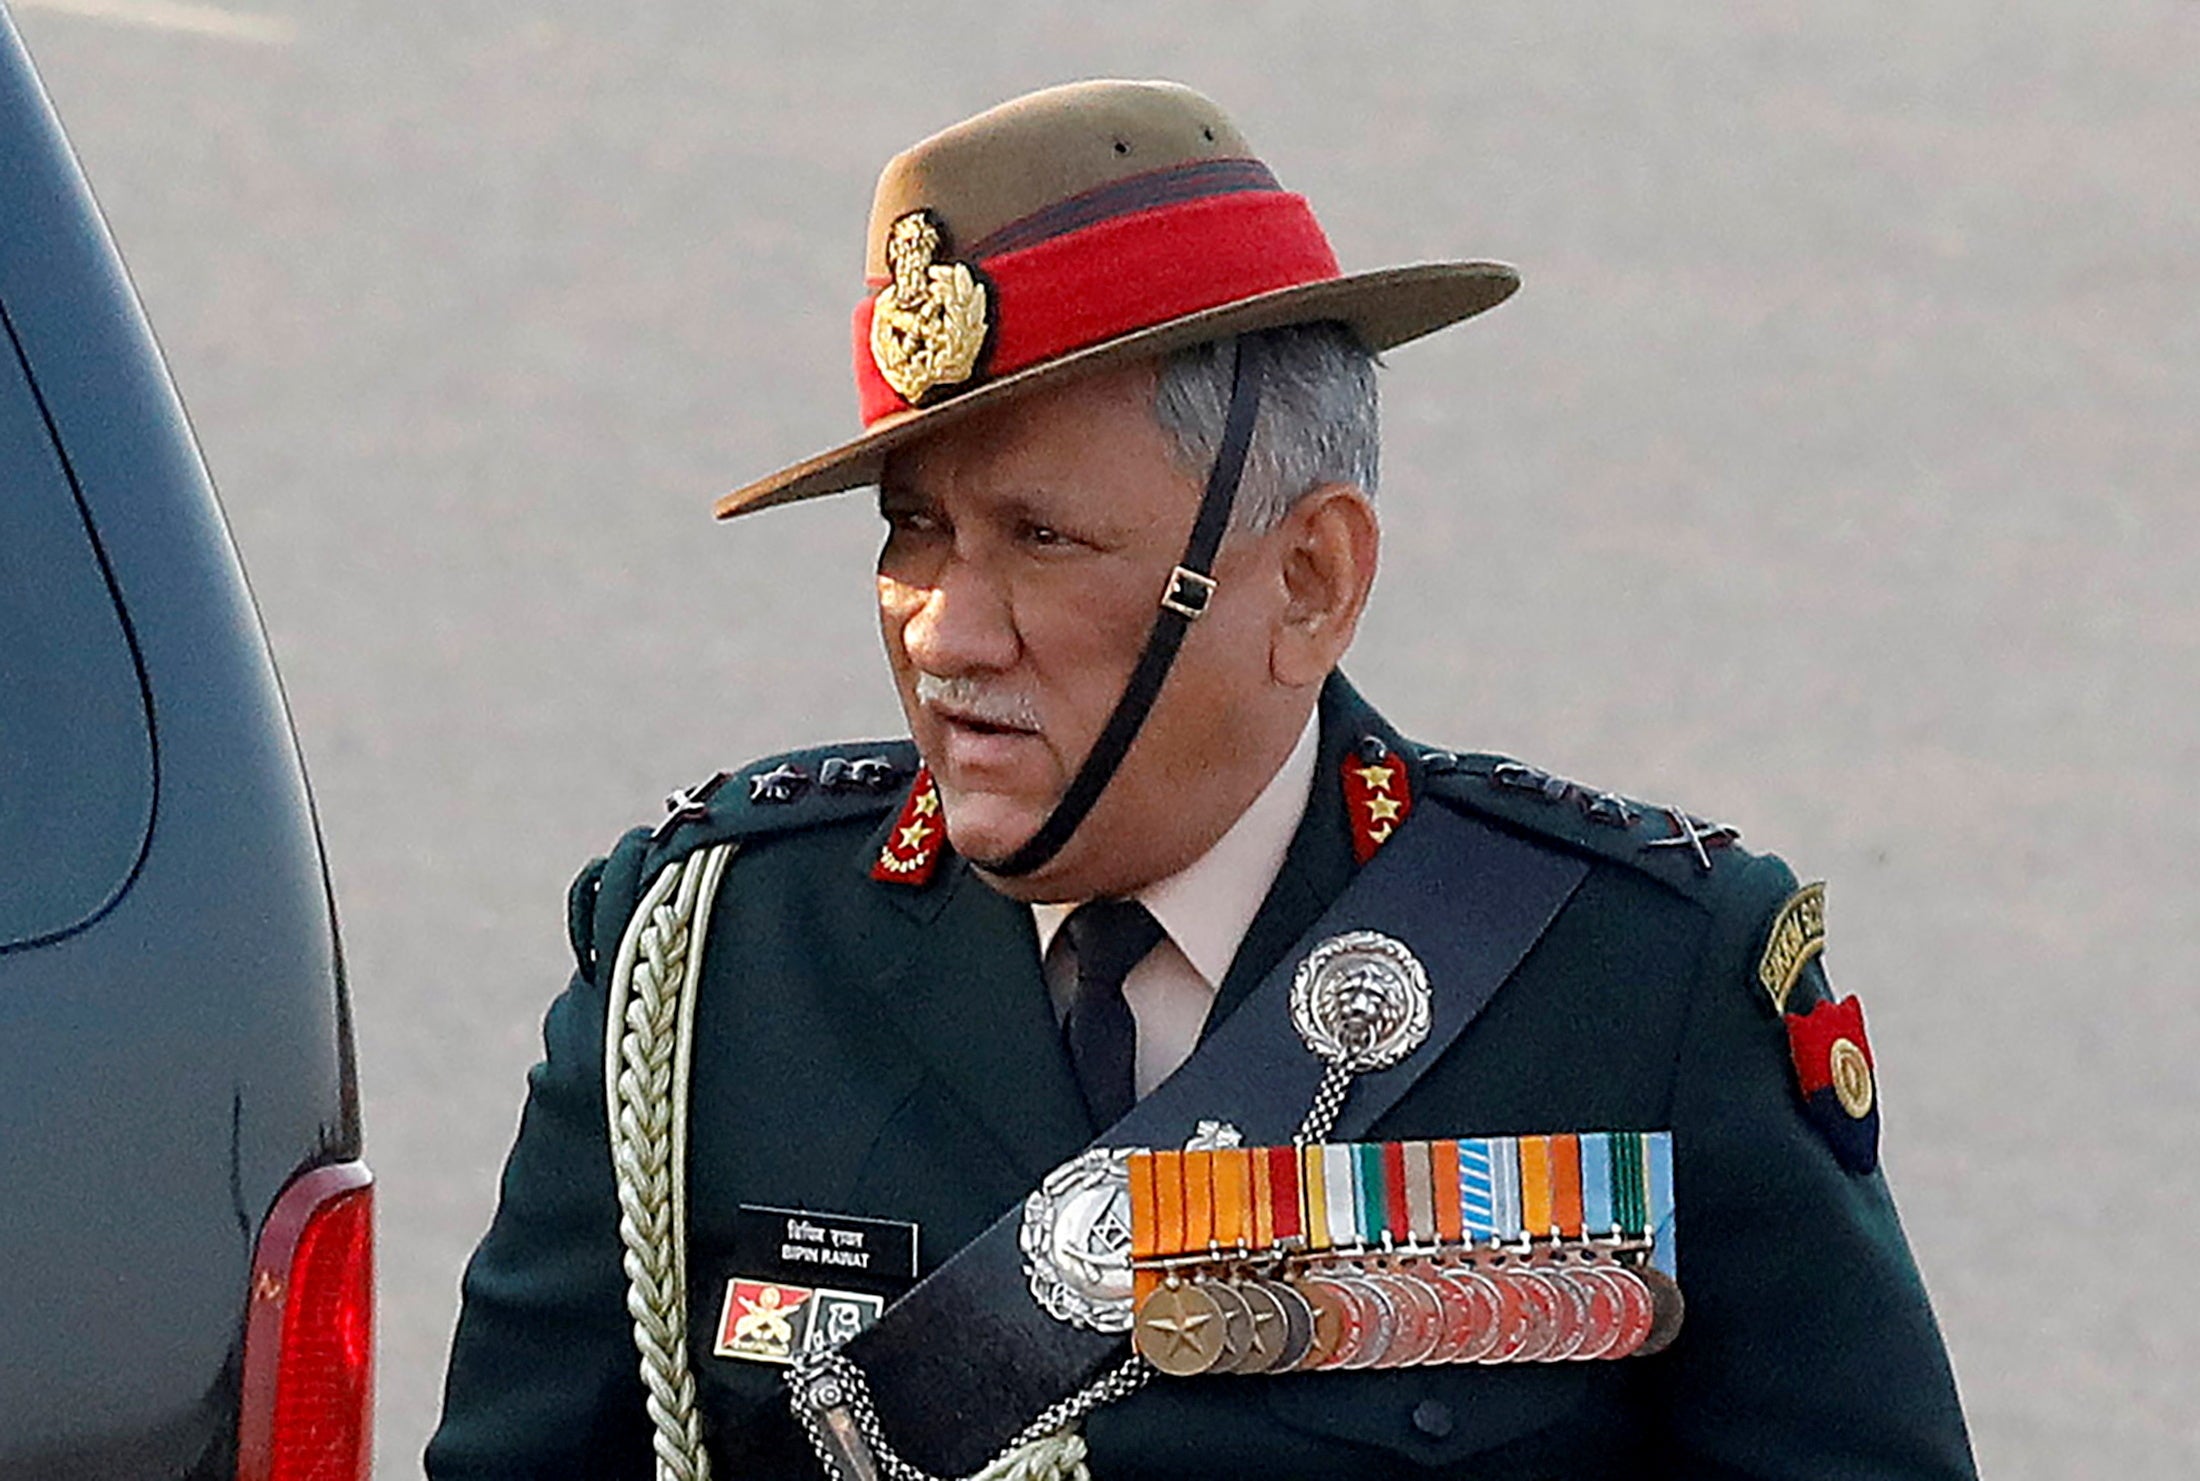 File: Indian first Chief Defence of Staff General Bipin Rawat arrives for the Beating the Retreat ceremony in New Delhi, India in 2019